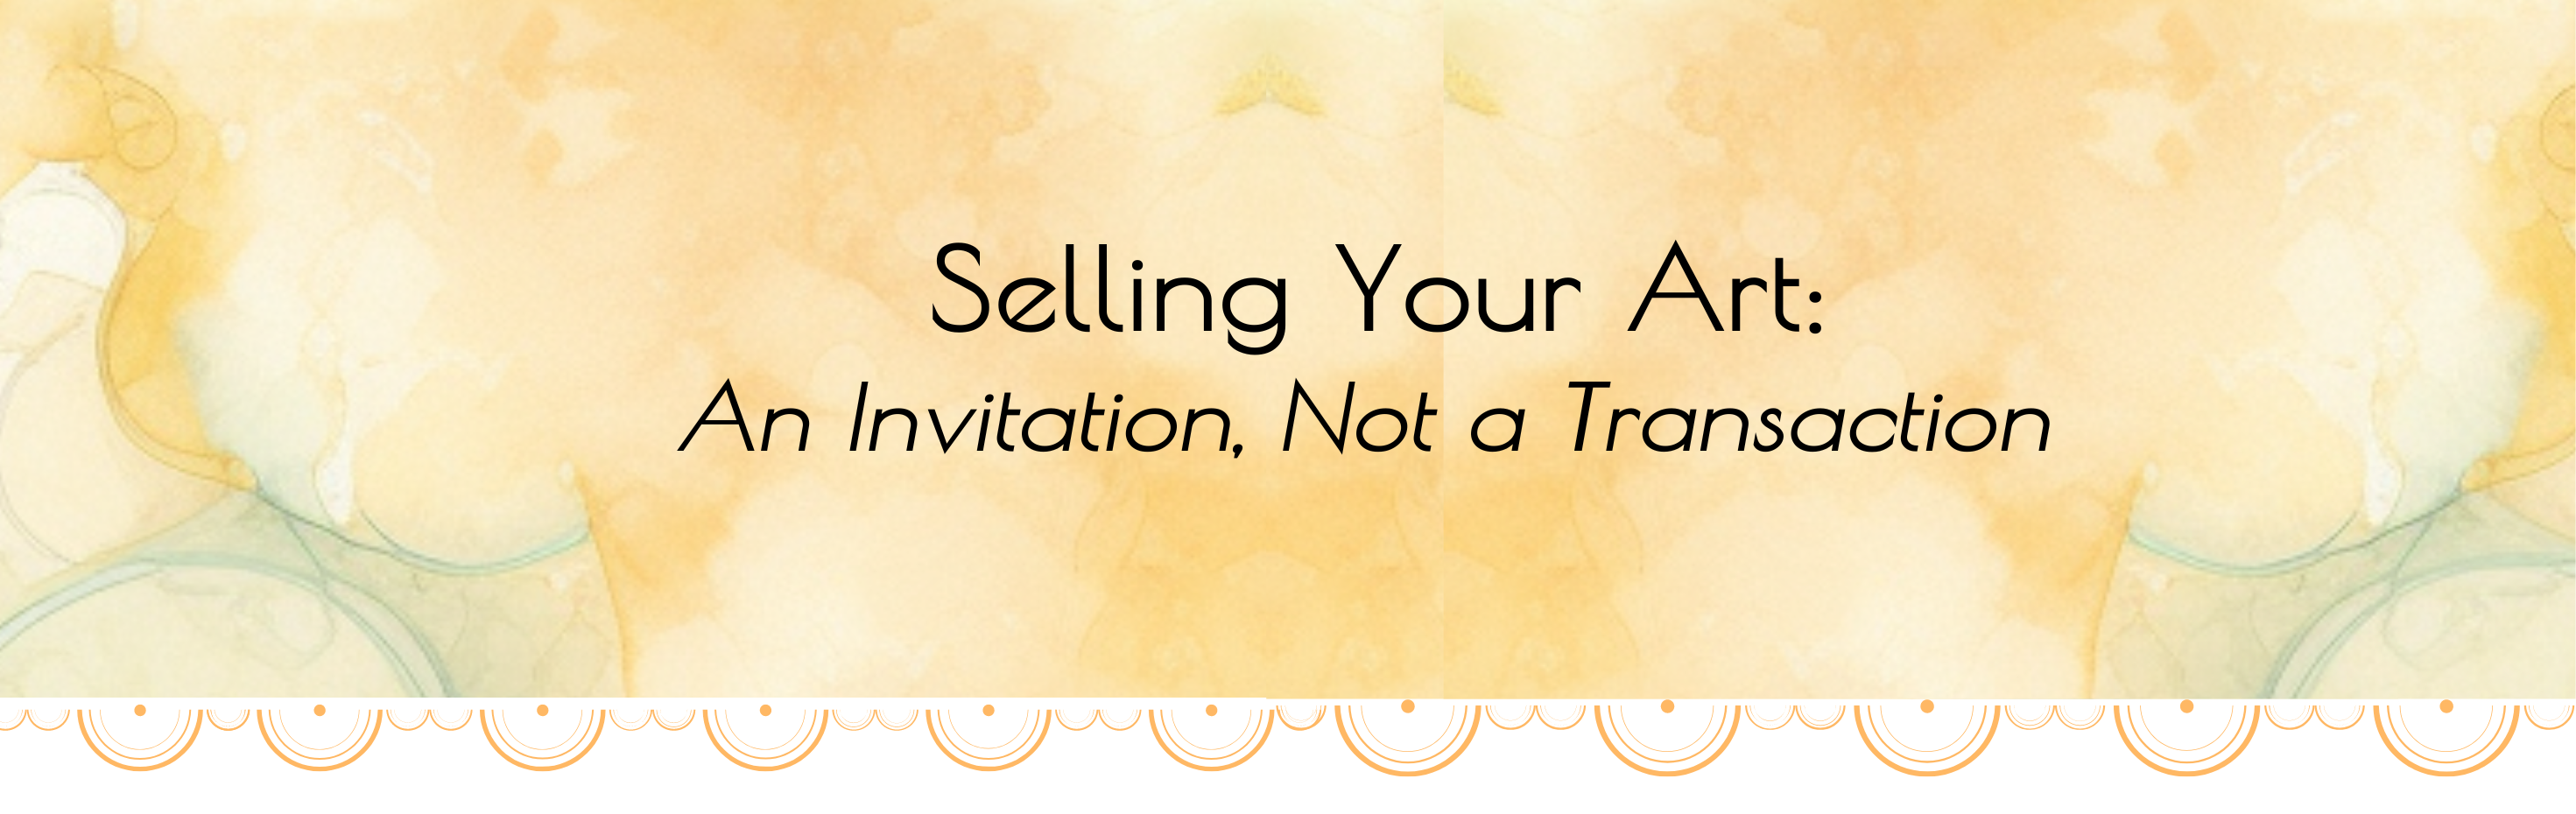 Selling Your Art: An Invitation, Not a Transaction